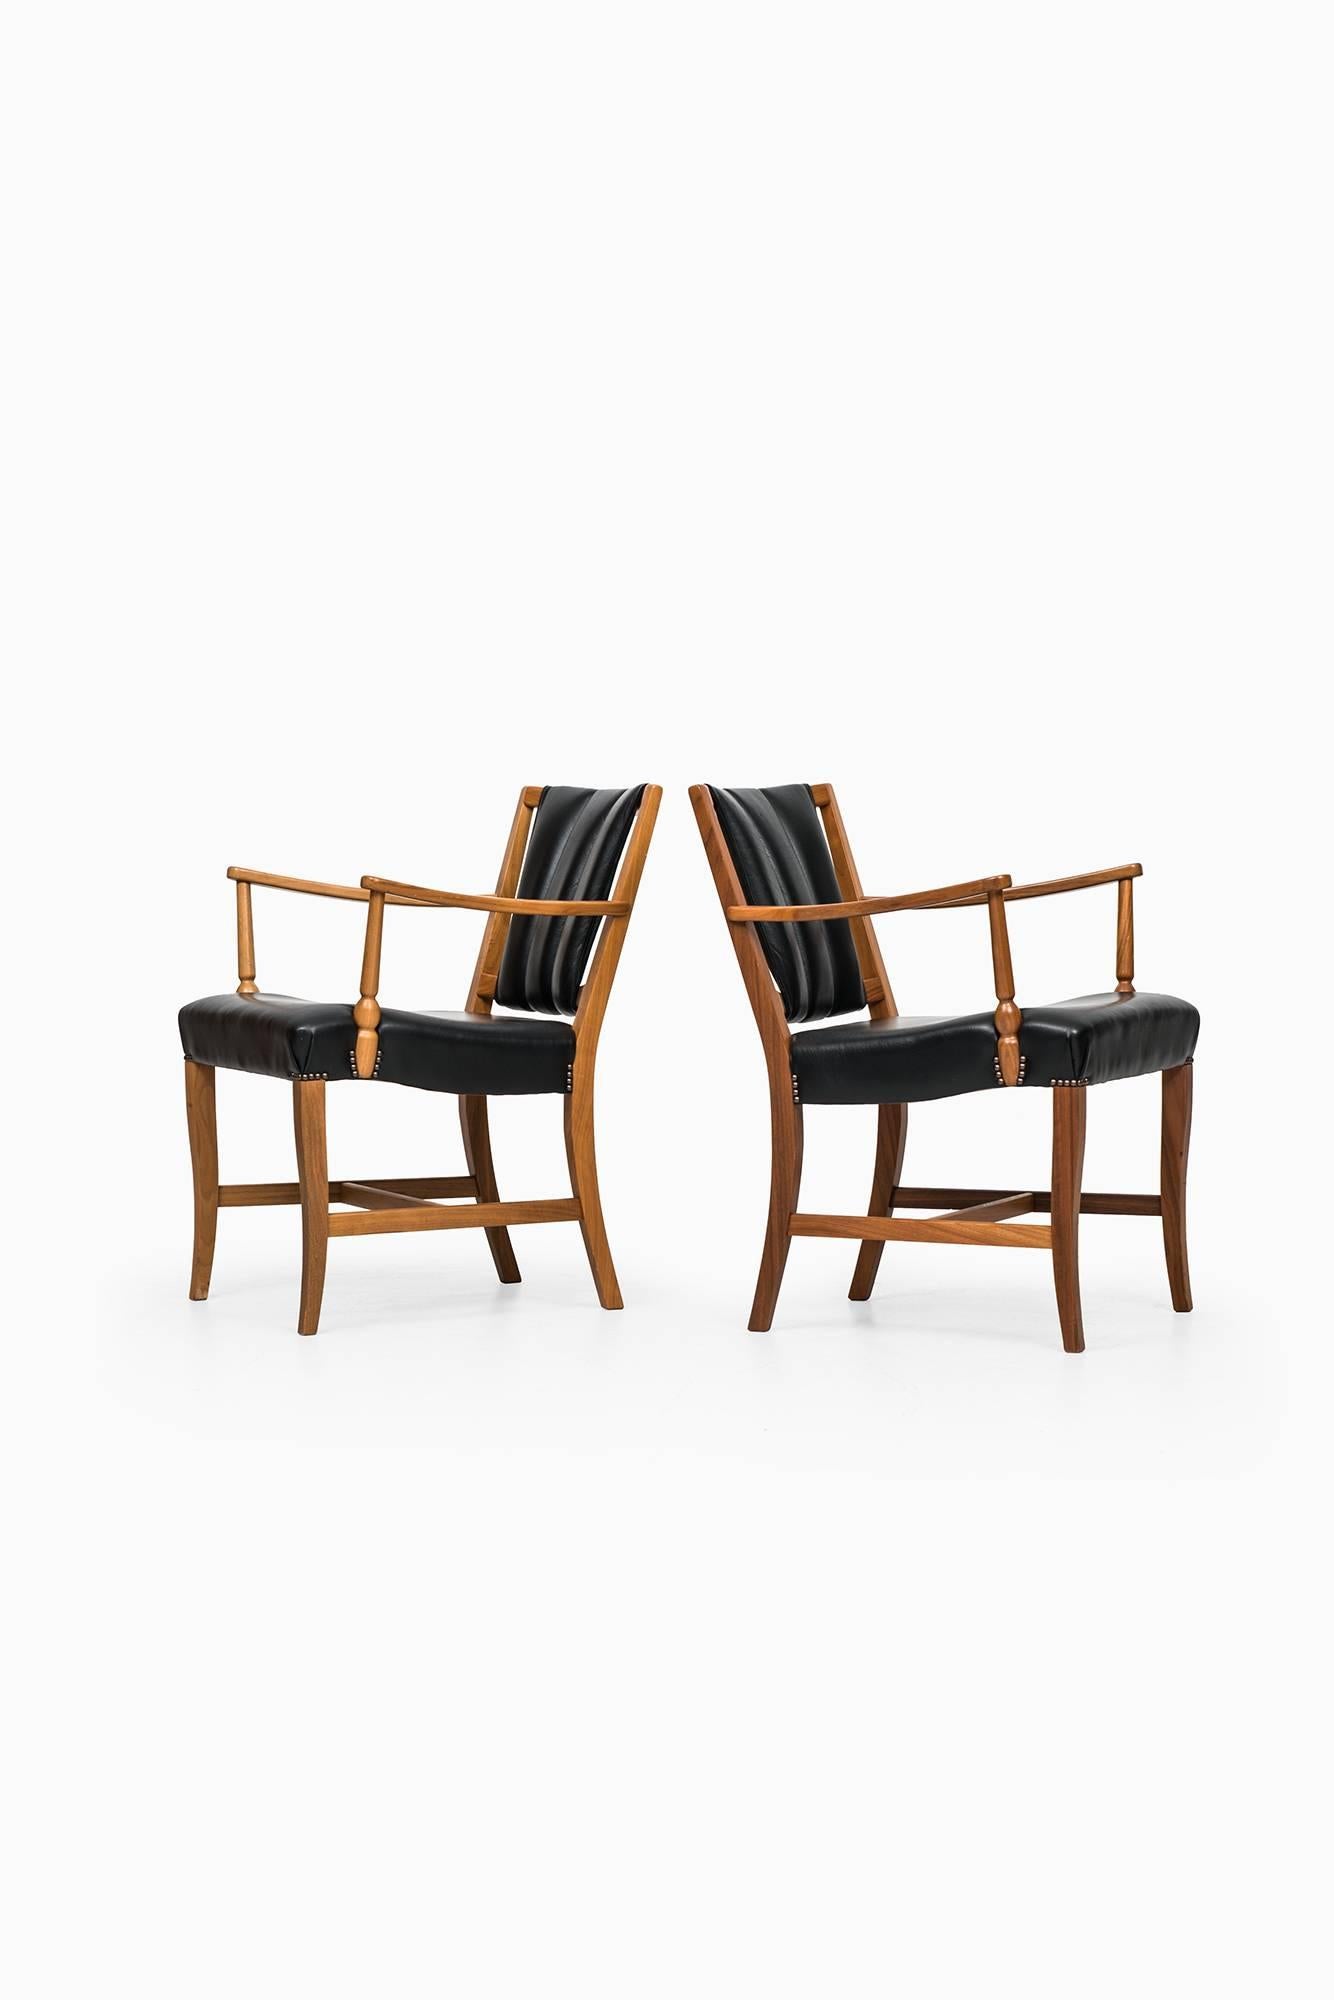 Rare pair of easy chairs / armchairs designed by Josef Frank. Produced by Svenskt Tenn in Sweden.